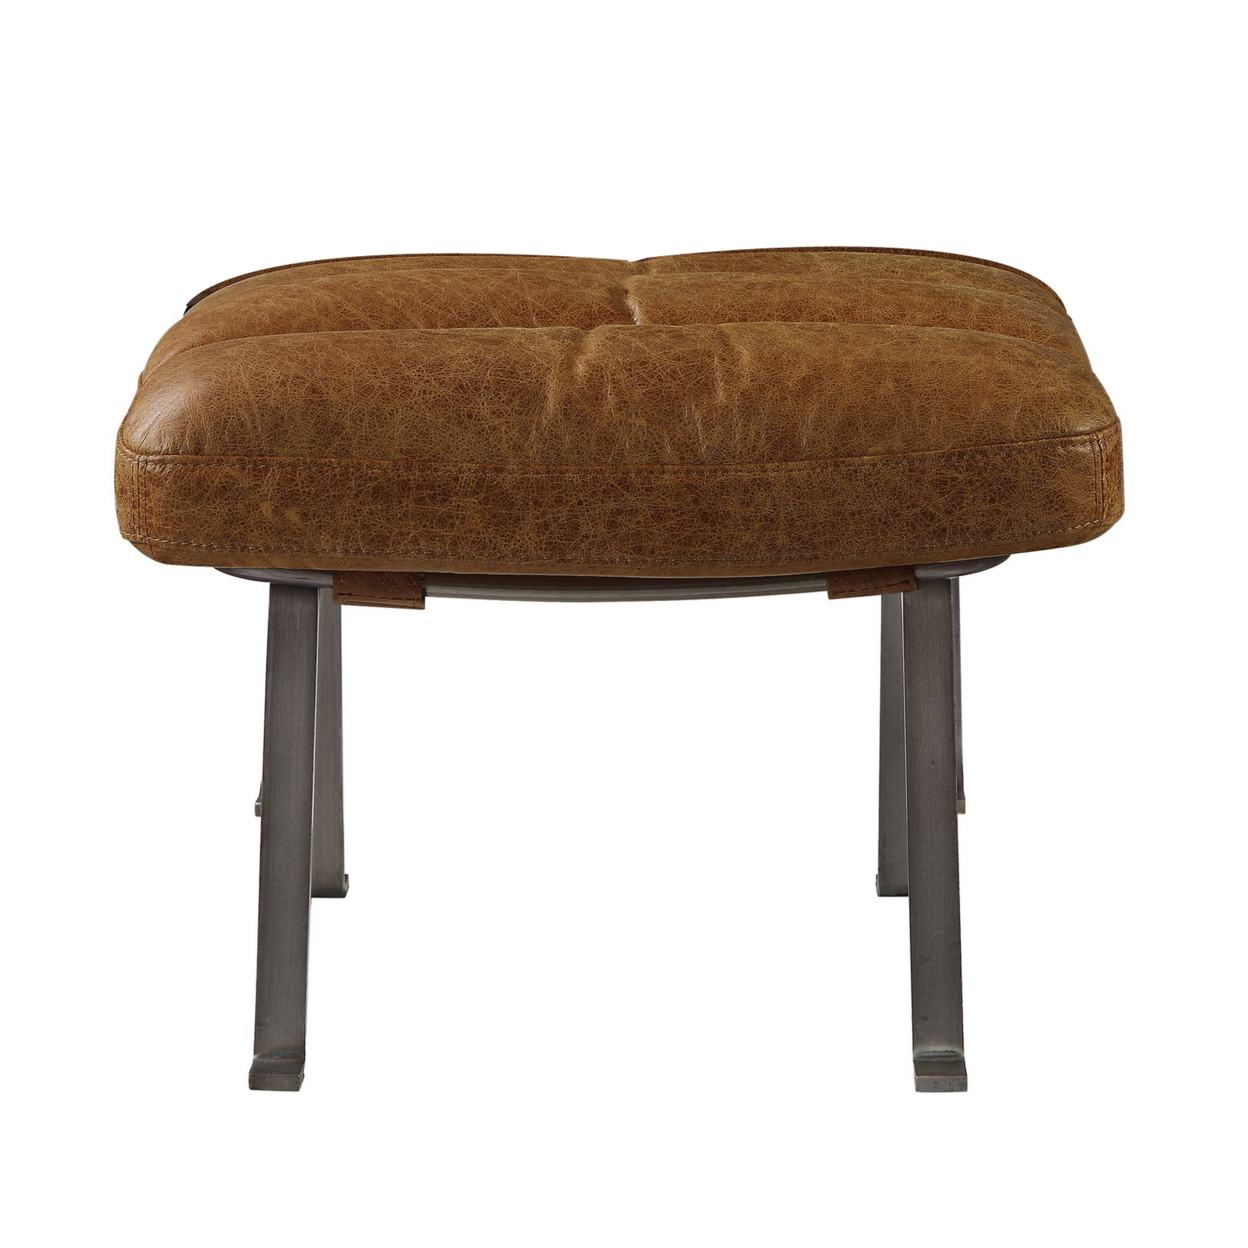 Horizontal Channel Tufted Ottoman With Angled Metal Legs, Brown And Silver- Saltoro Sherpi